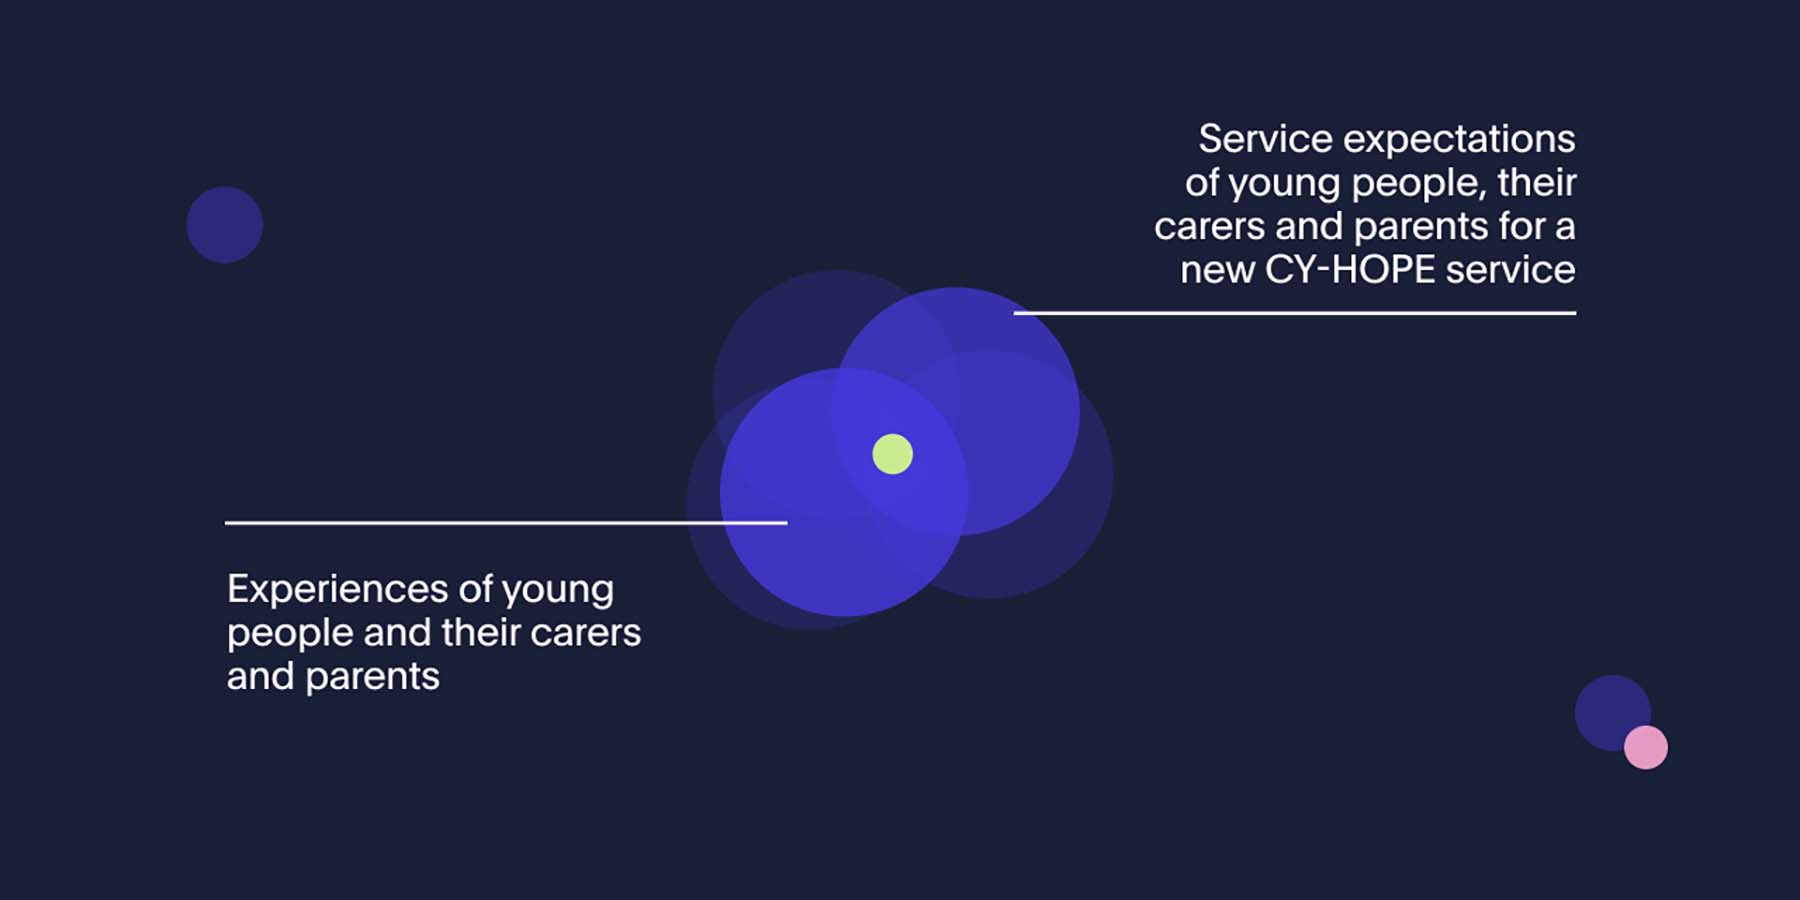 venn diagram showing the relationship between young people and the service expectations